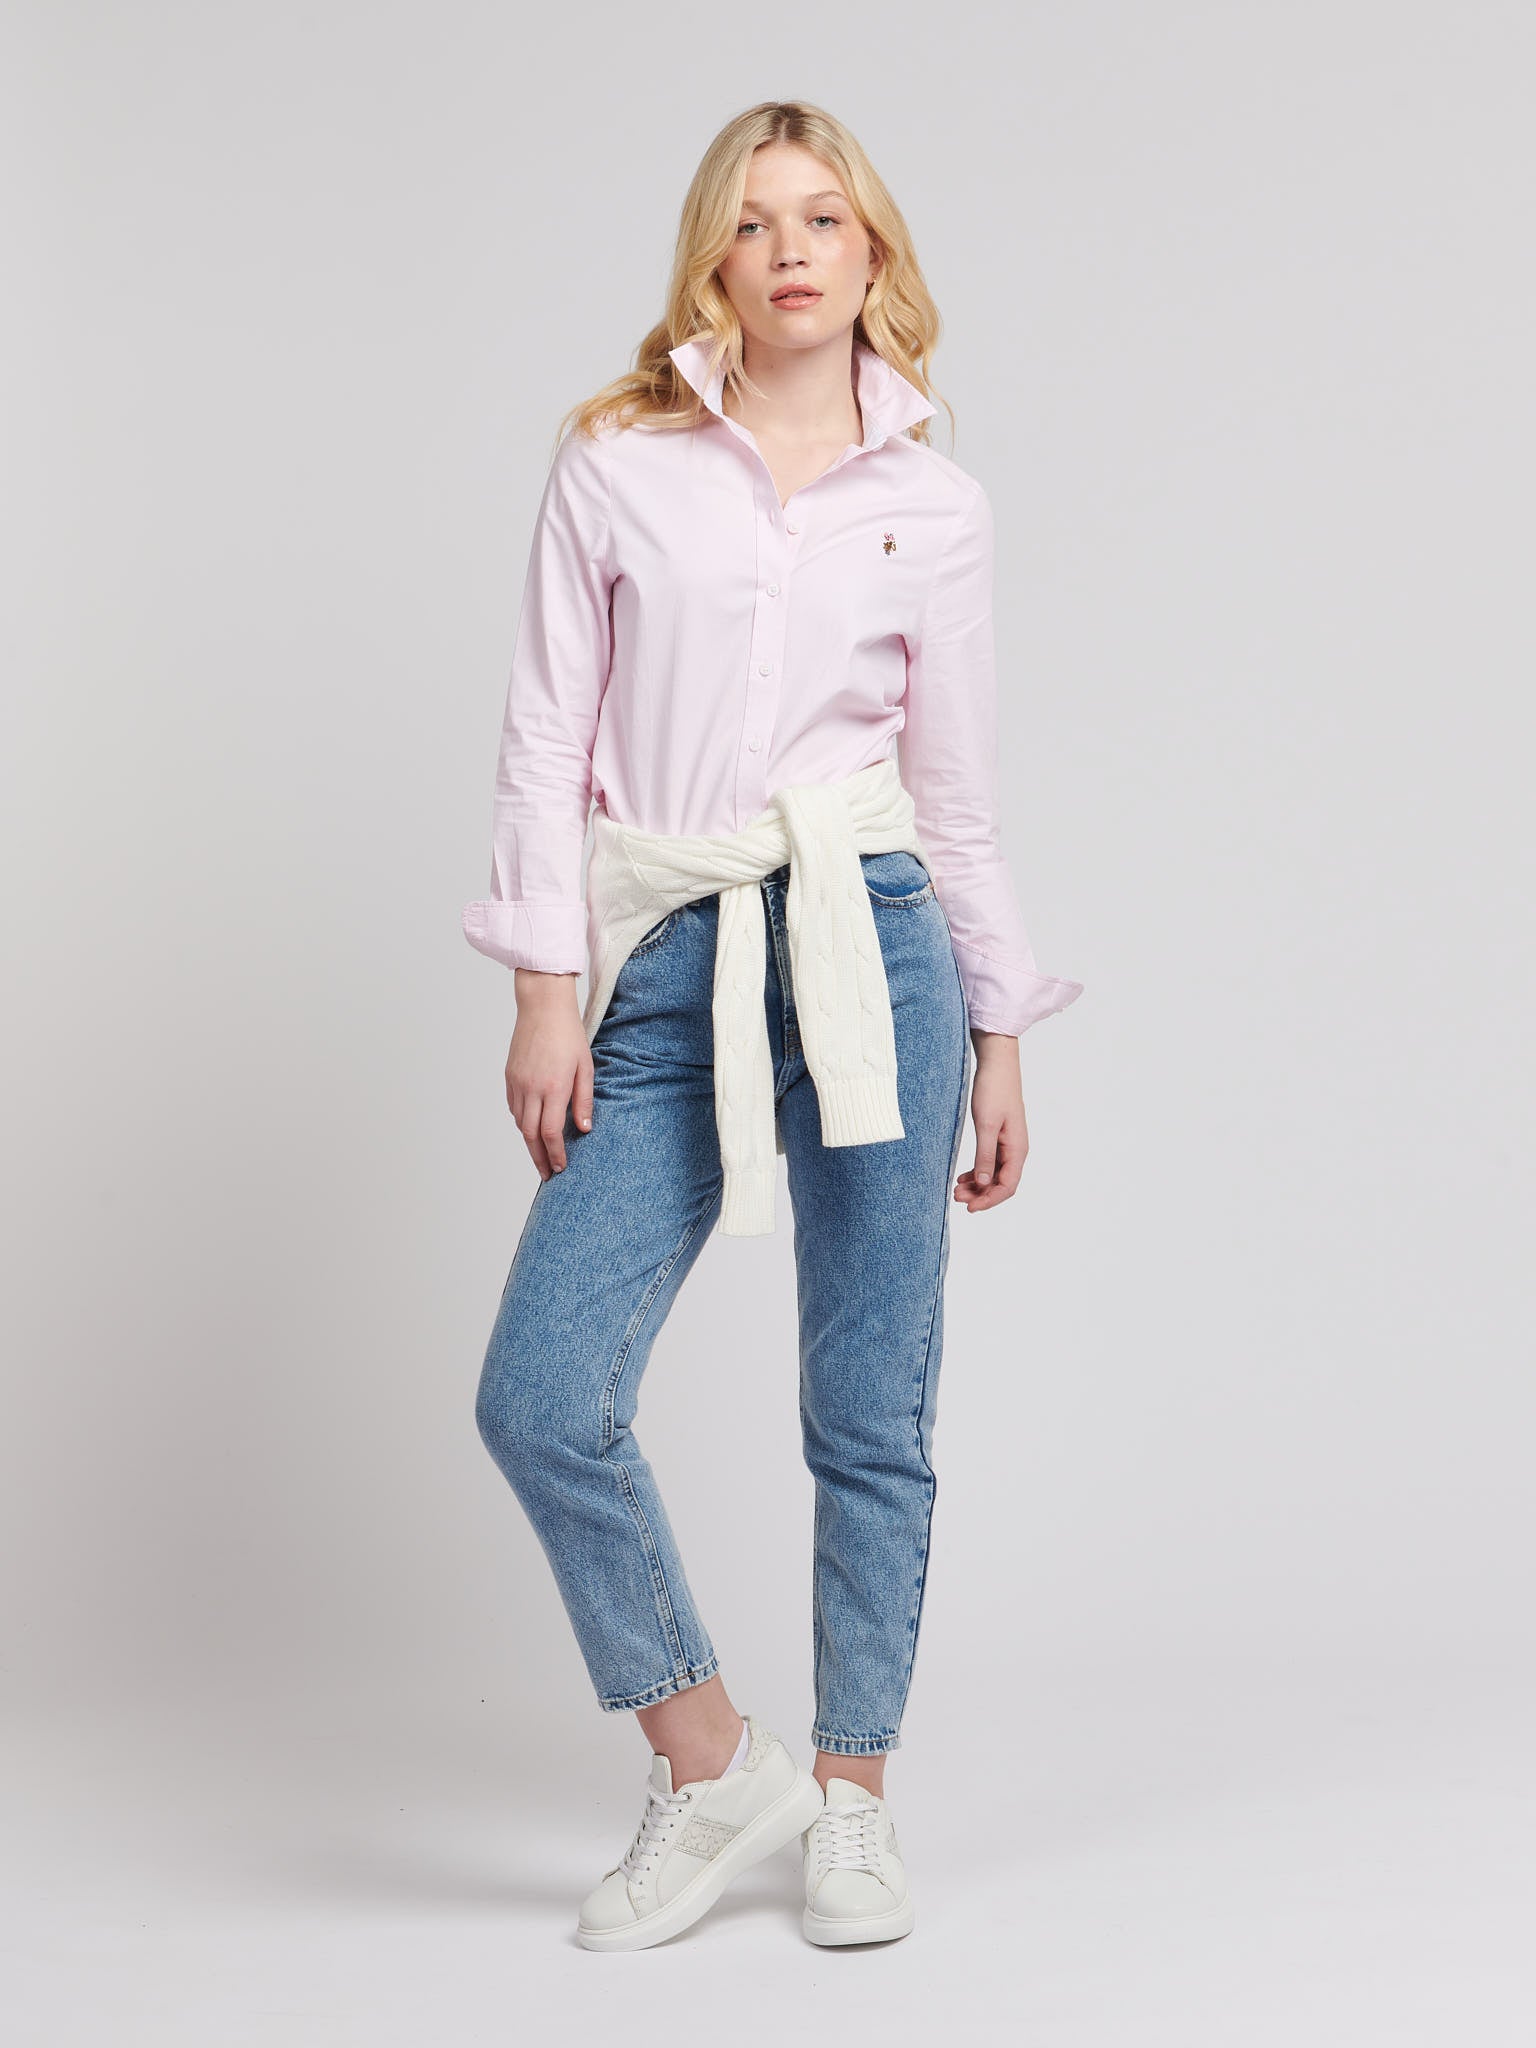 Womens Classic Fit Oxford Shirt in Silver Pink